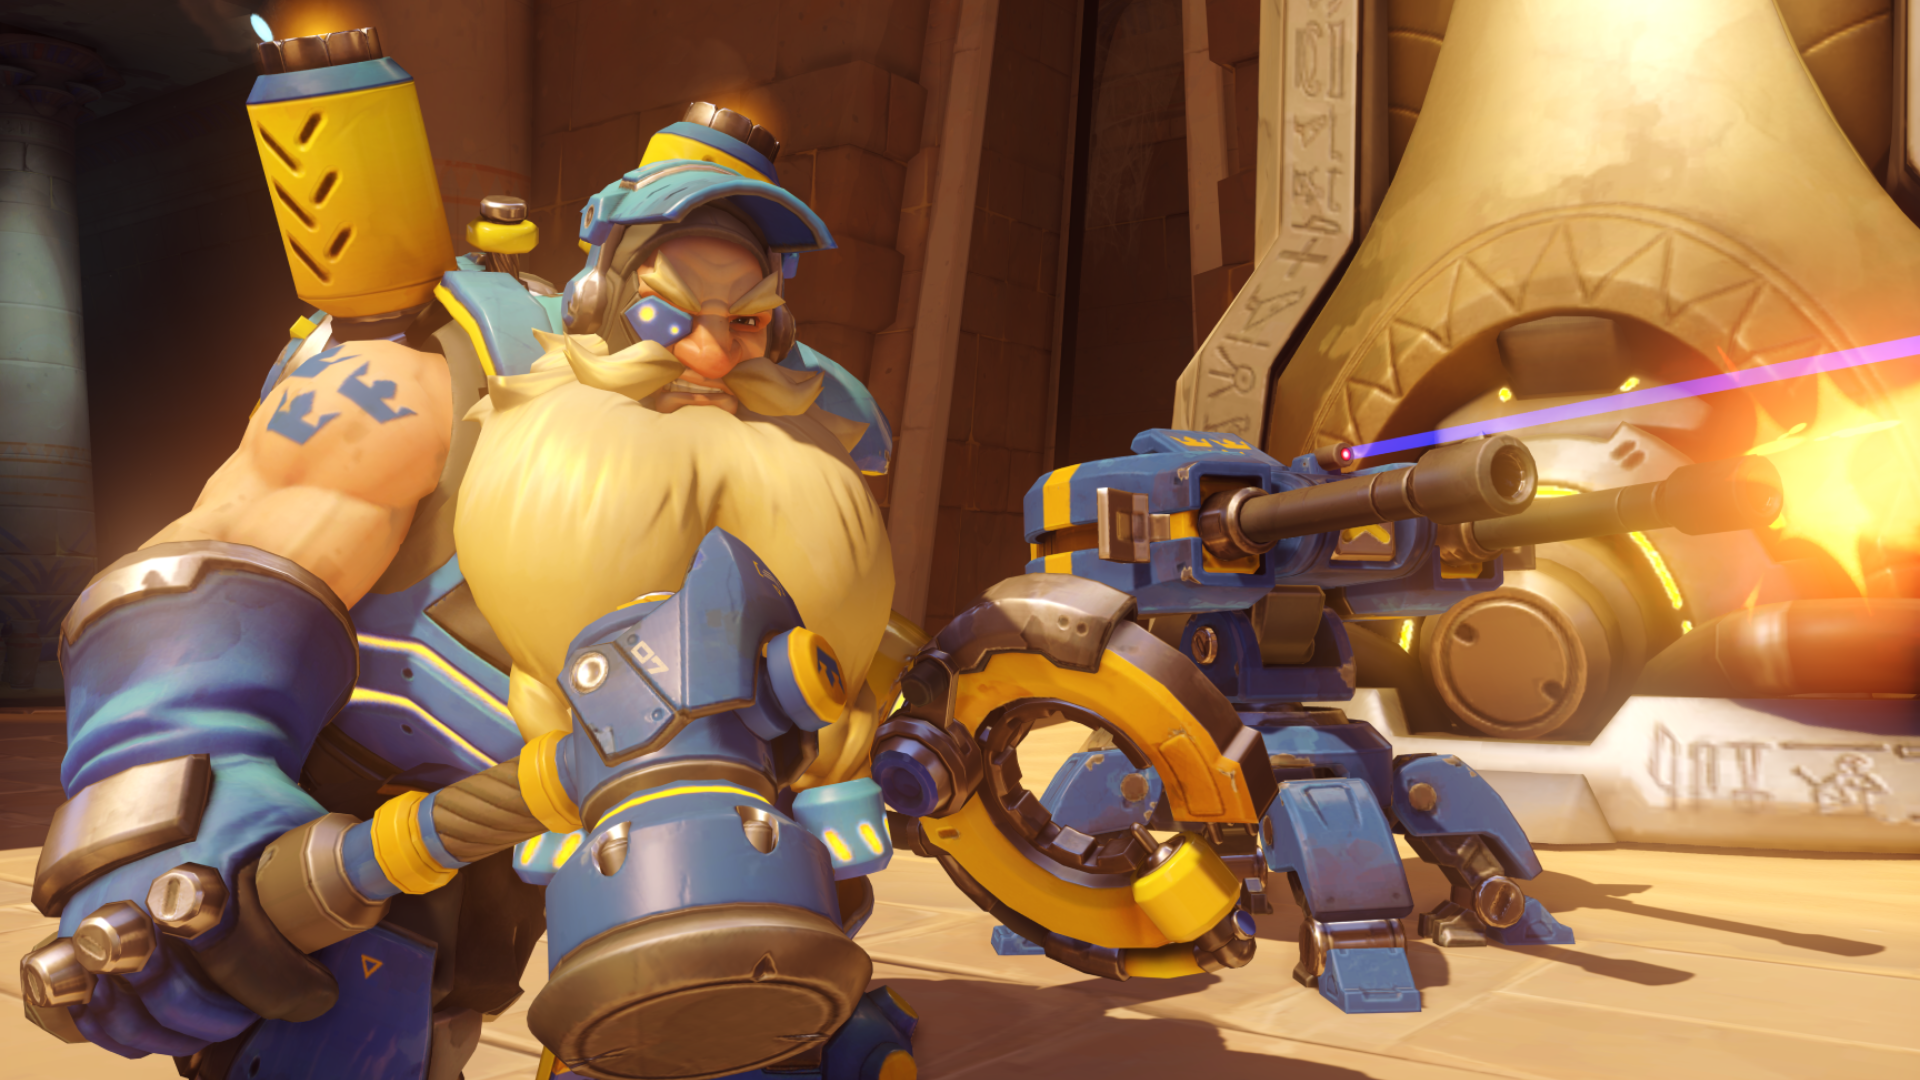 Torbjorn standing next to his turret